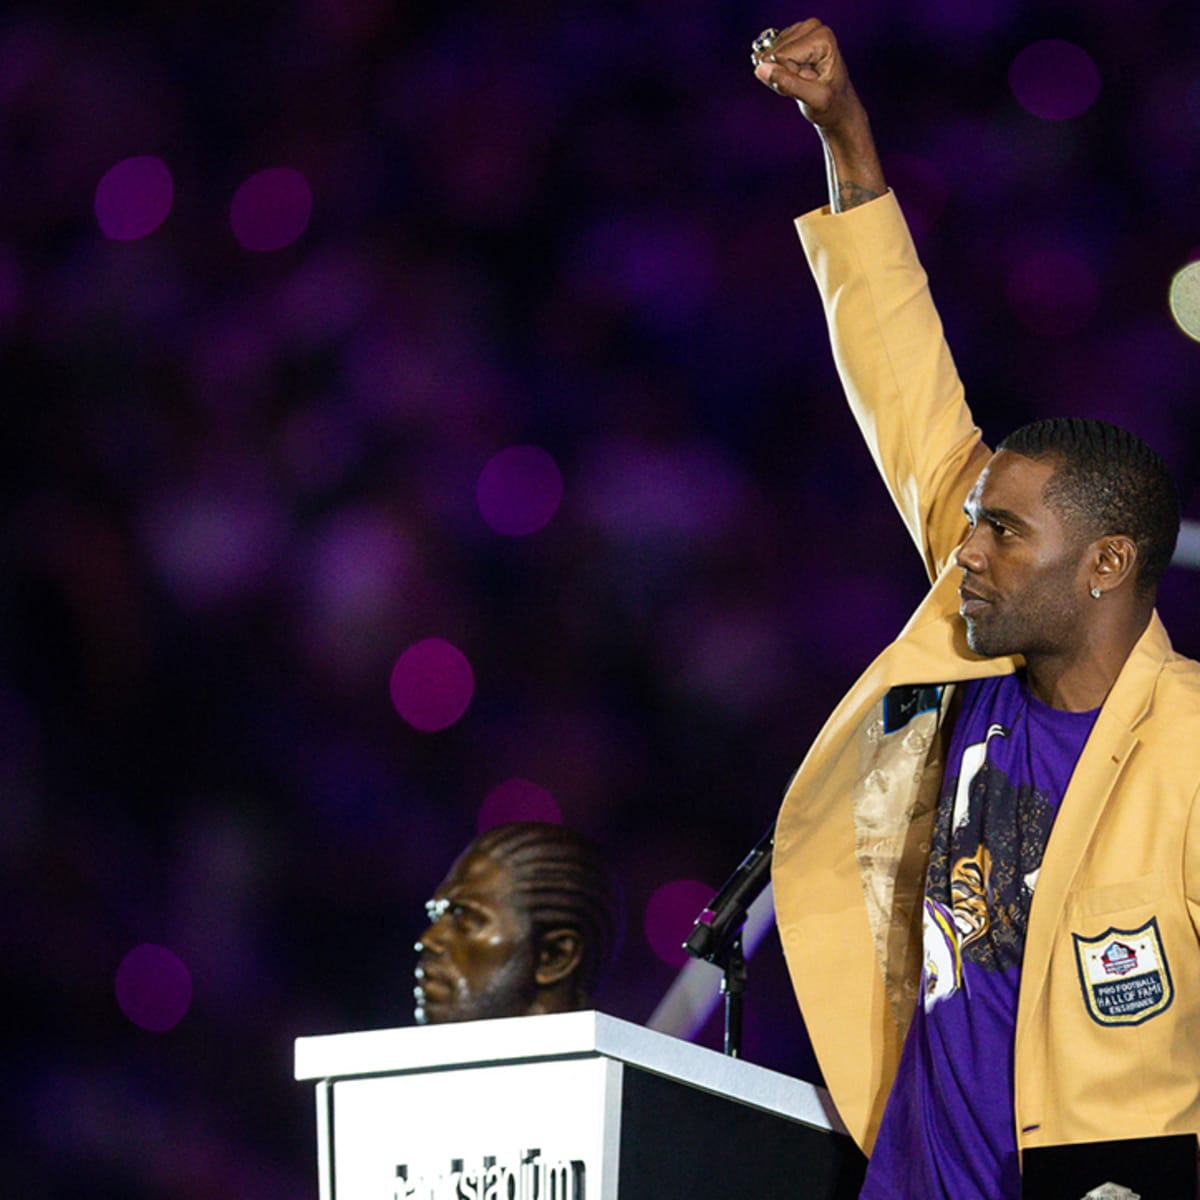 Modern Notoriety on X: Hall of Fame WR @RandyMoss pulled up to